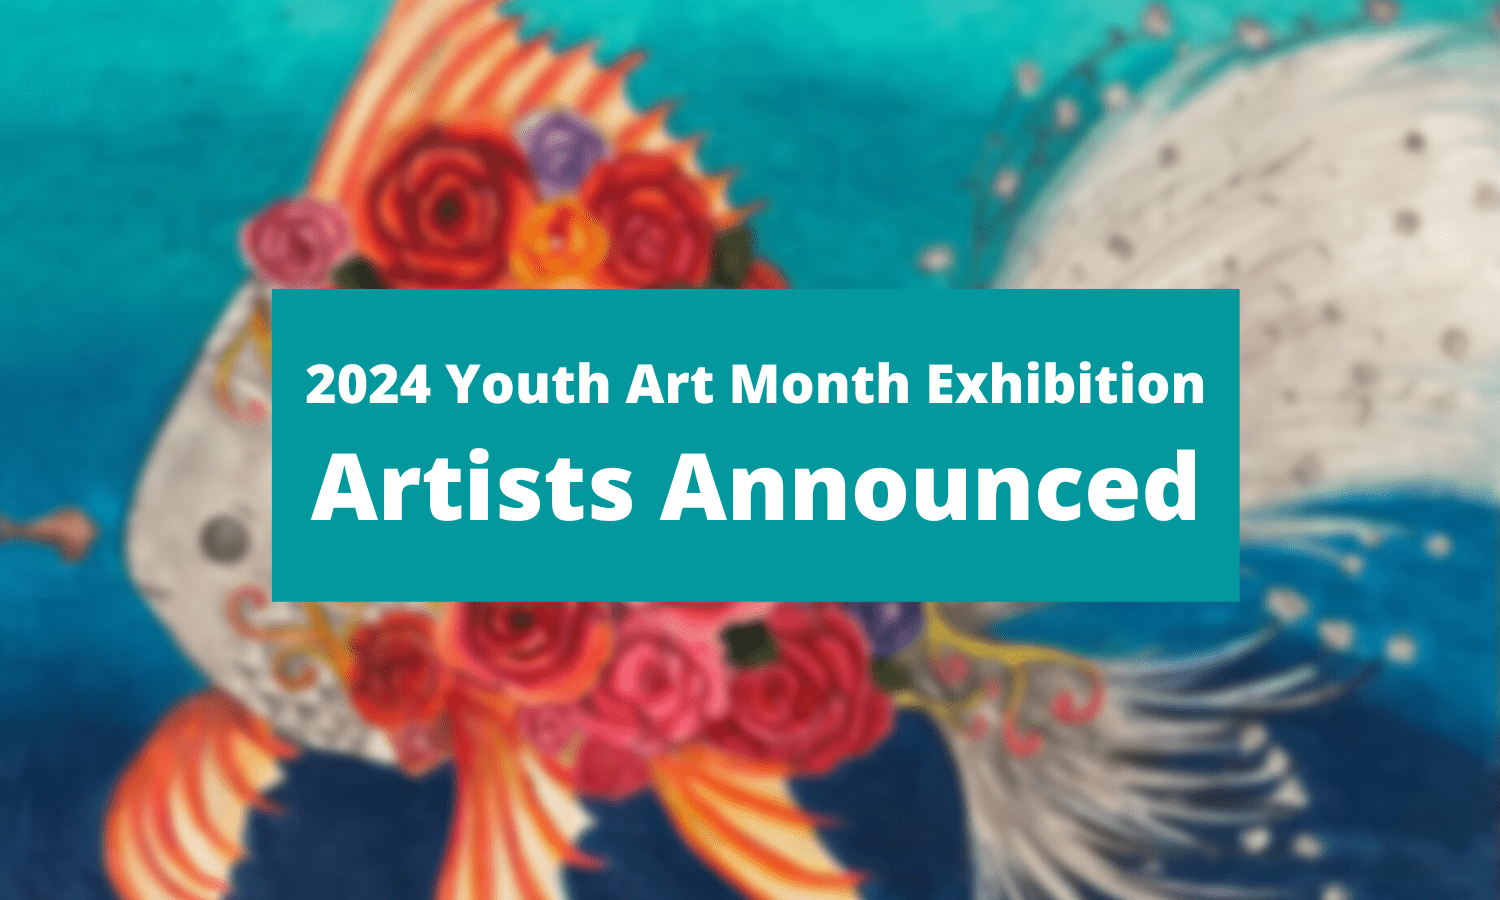 2024 Youth Art Month Exhibition @ The Capital